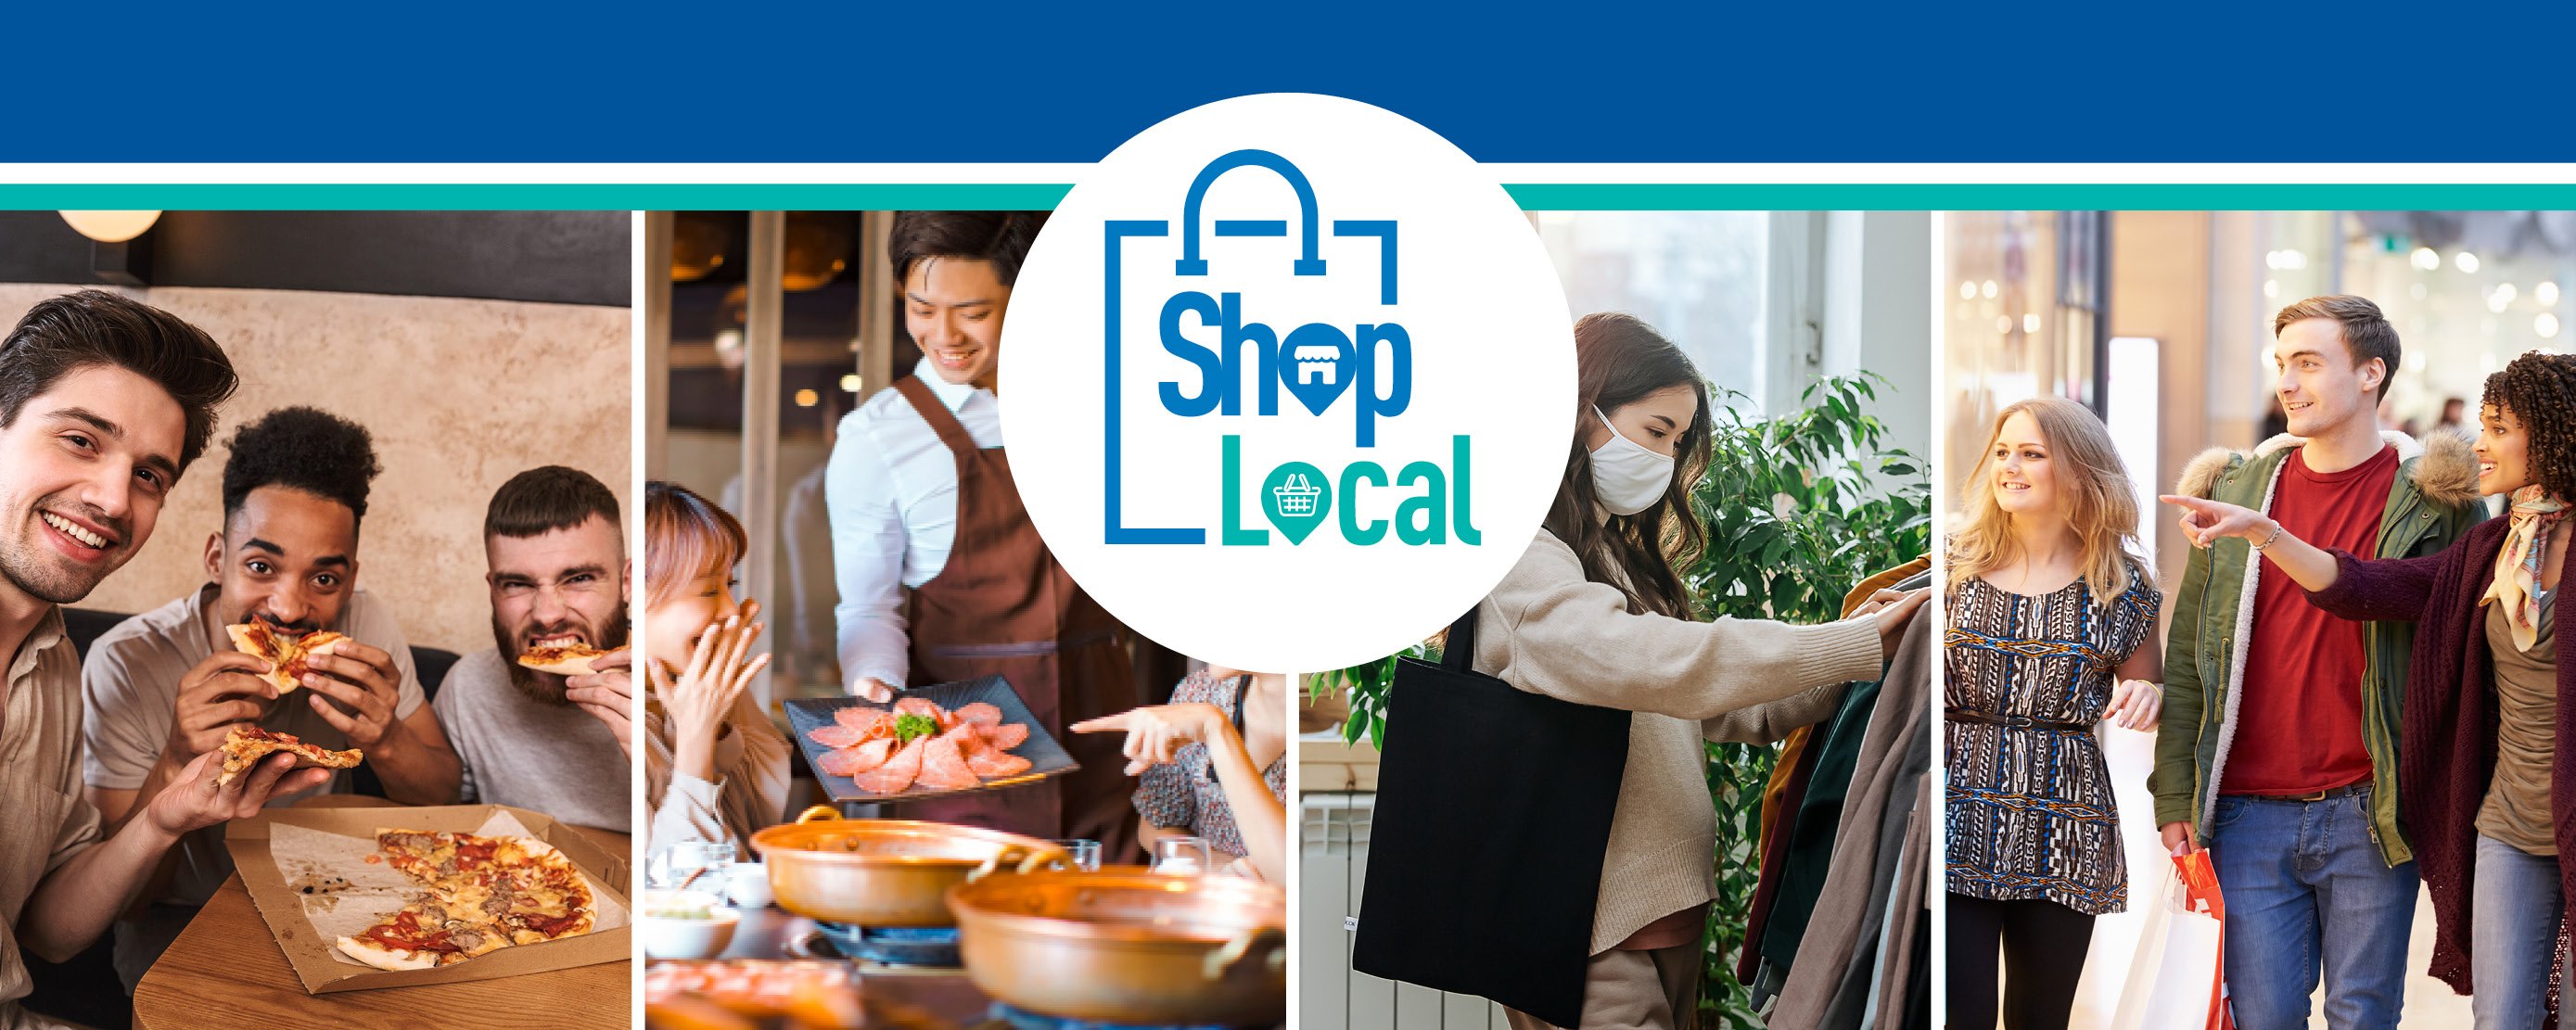 image of shopping local business, bakery shop, grocery shop, retail shop and restaurant